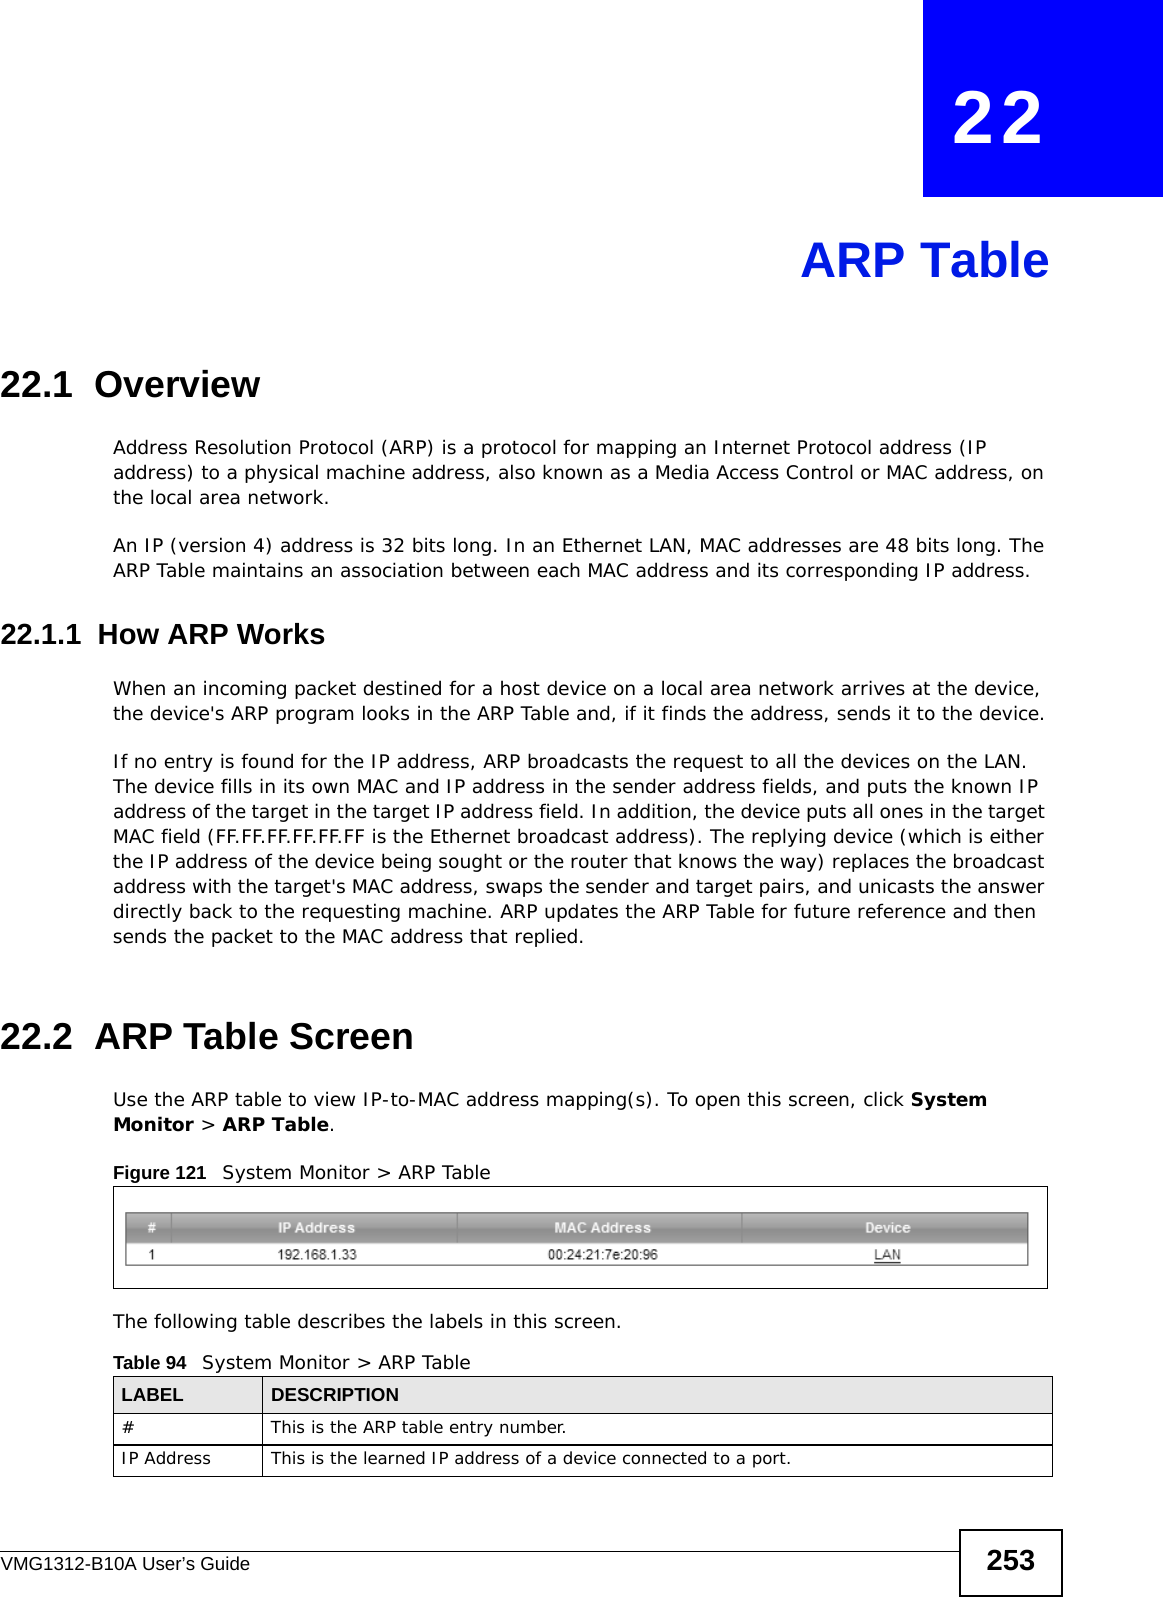 VMG1312-B10A User’s Guide 253CHAPTER   22ARP Table22.1  OverviewAddress Resolution Protocol (ARP) is a protocol for mapping an Internet Protocol address (IP address) to a physical machine address, also known as a Media Access Control or MAC address, on the local area network. An IP (version 4) address is 32 bits long. In an Ethernet LAN, MAC addresses are 48 bits long. The ARP Table maintains an association between each MAC address and its corresponding IP address. 22.1.1  How ARP WorksWhen an incoming packet destined for a host device on a local area network arrives at the device, the device&apos;s ARP program looks in the ARP Table and, if it finds the address, sends it to the device.If no entry is found for the IP address, ARP broadcasts the request to all the devices on the LAN. The device fills in its own MAC and IP address in the sender address fields, and puts the known IP address of the target in the target IP address field. In addition, the device puts all ones in the target MAC field (FF.FF.FF.FF.FF.FF is the Ethernet broadcast address). The replying device (which is either the IP address of the device being sought or the router that knows the way) replaces the broadcast address with the target&apos;s MAC address, swaps the sender and target pairs, and unicasts the answer directly back to the requesting machine. ARP updates the ARP Table for future reference and then sends the packet to the MAC address that replied. 22.2  ARP Table ScreenUse the ARP table to view IP-to-MAC address mapping(s). To open this screen, click System Monitor &gt; ARP Table.Figure 121   System Monitor &gt; ARP TableThe following table describes the labels in this screen.Table 94   System Monitor &gt; ARP TableLABEL DESCRIPTION# This is the ARP table entry number.IP Address This is the learned IP address of a device connected to a port.